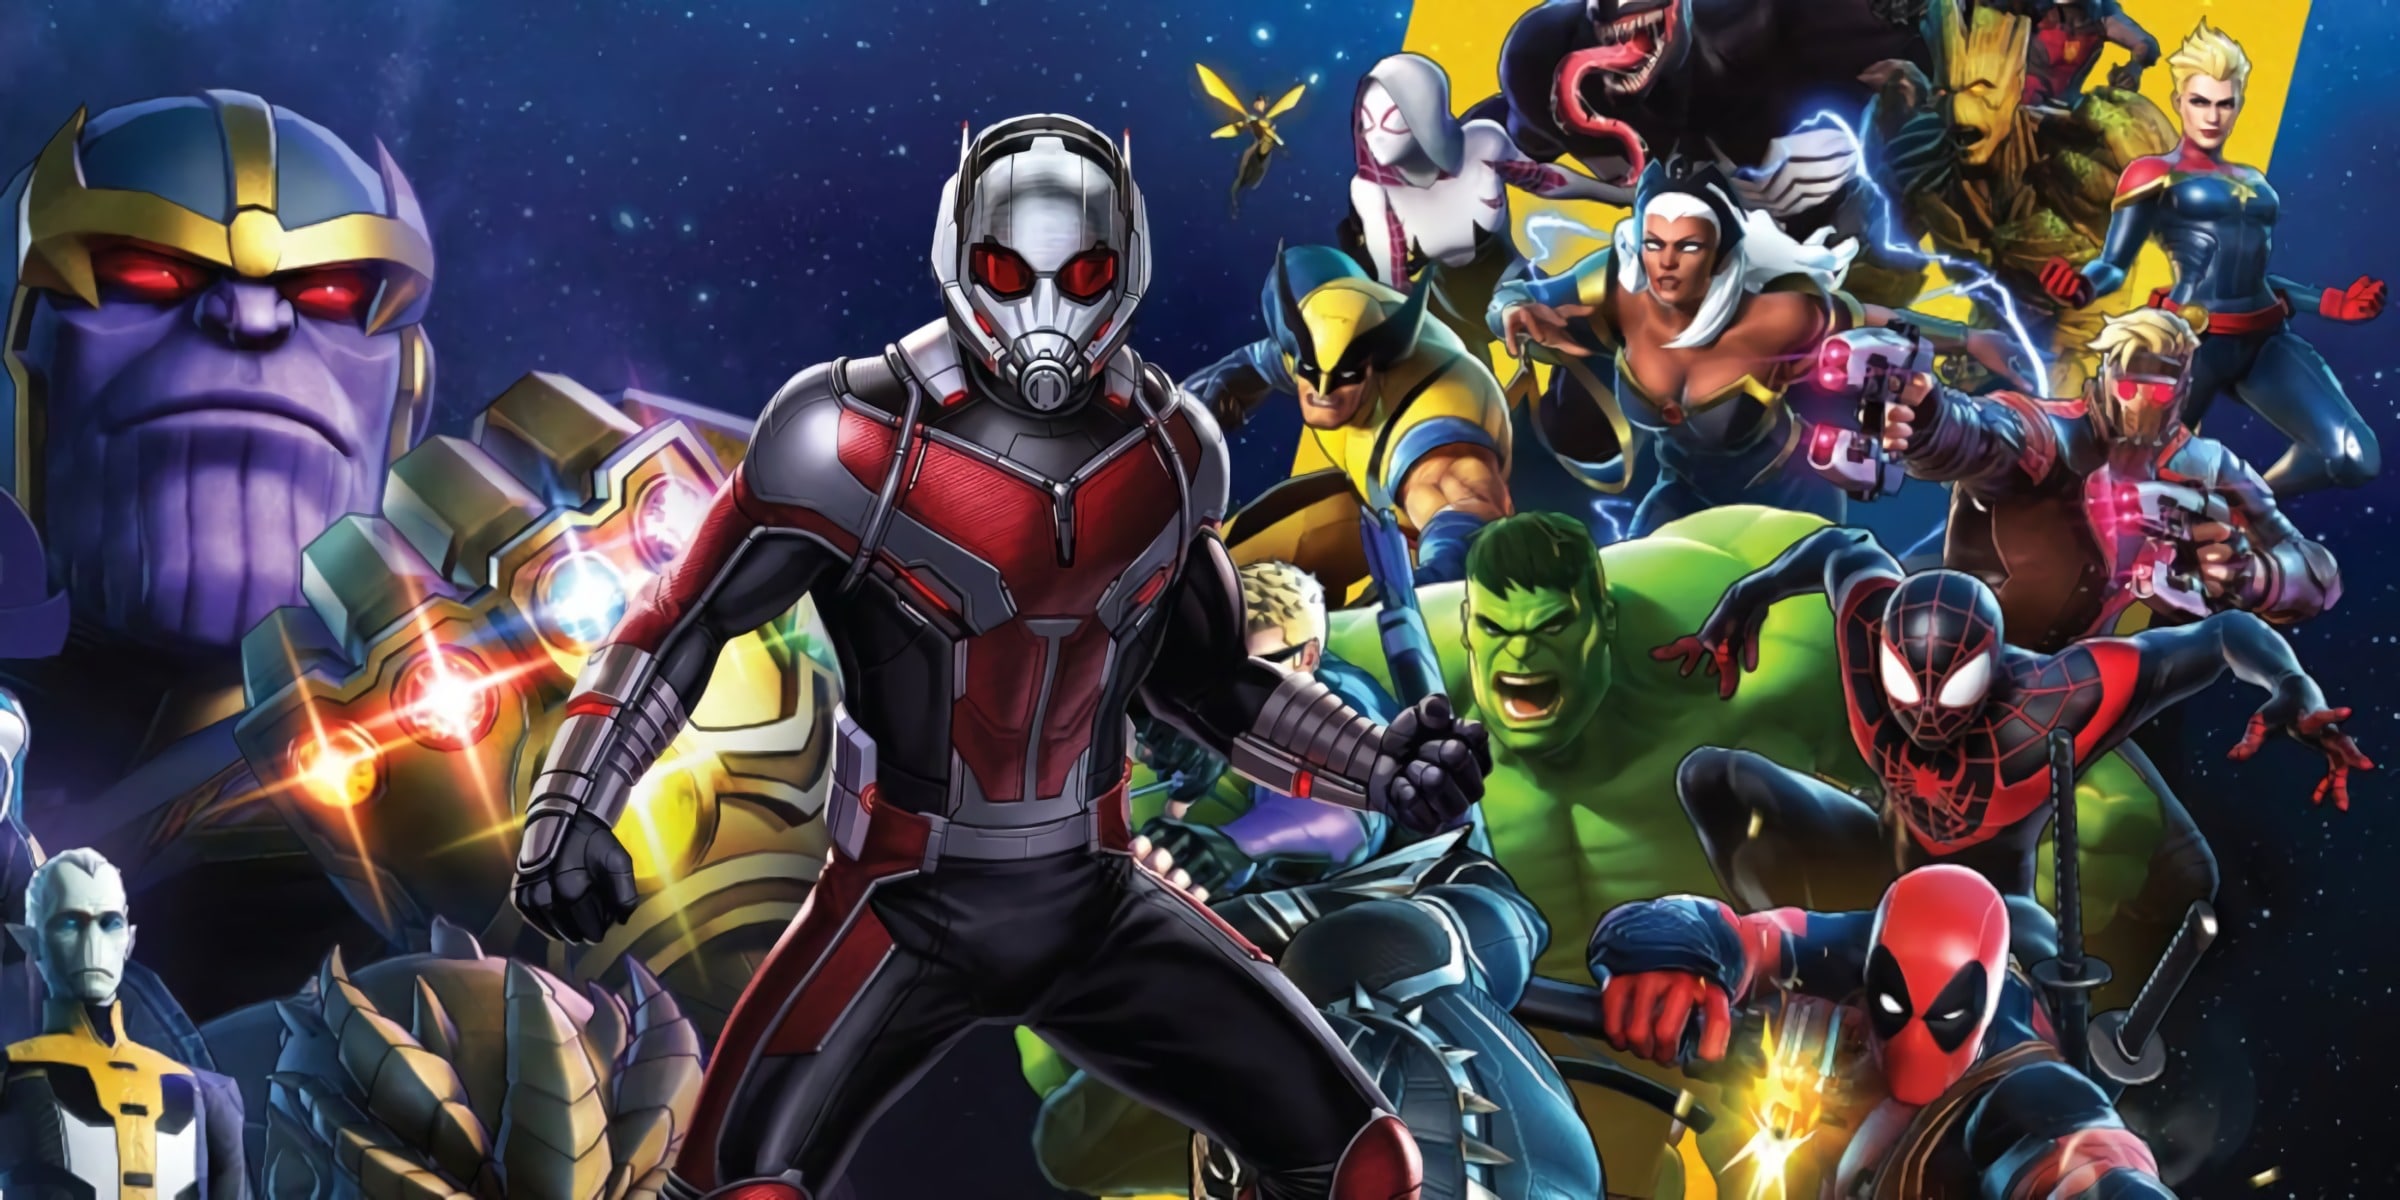 Ant-Man Is the Latest Marvel Superhero to Join Fortnite - IGN